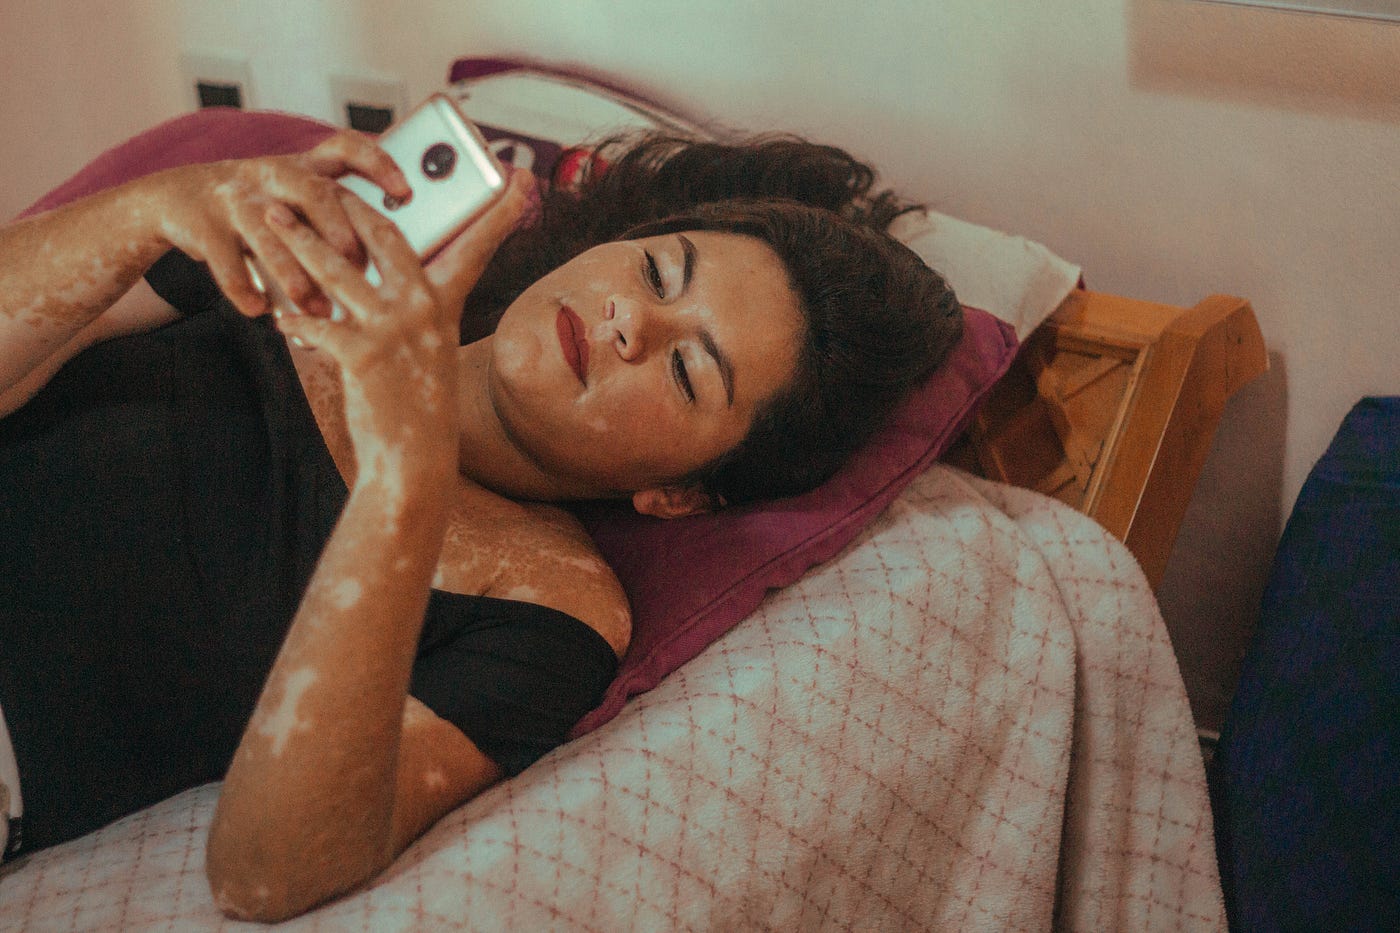 A photo of a young woman lying in bed, texting on her phone.